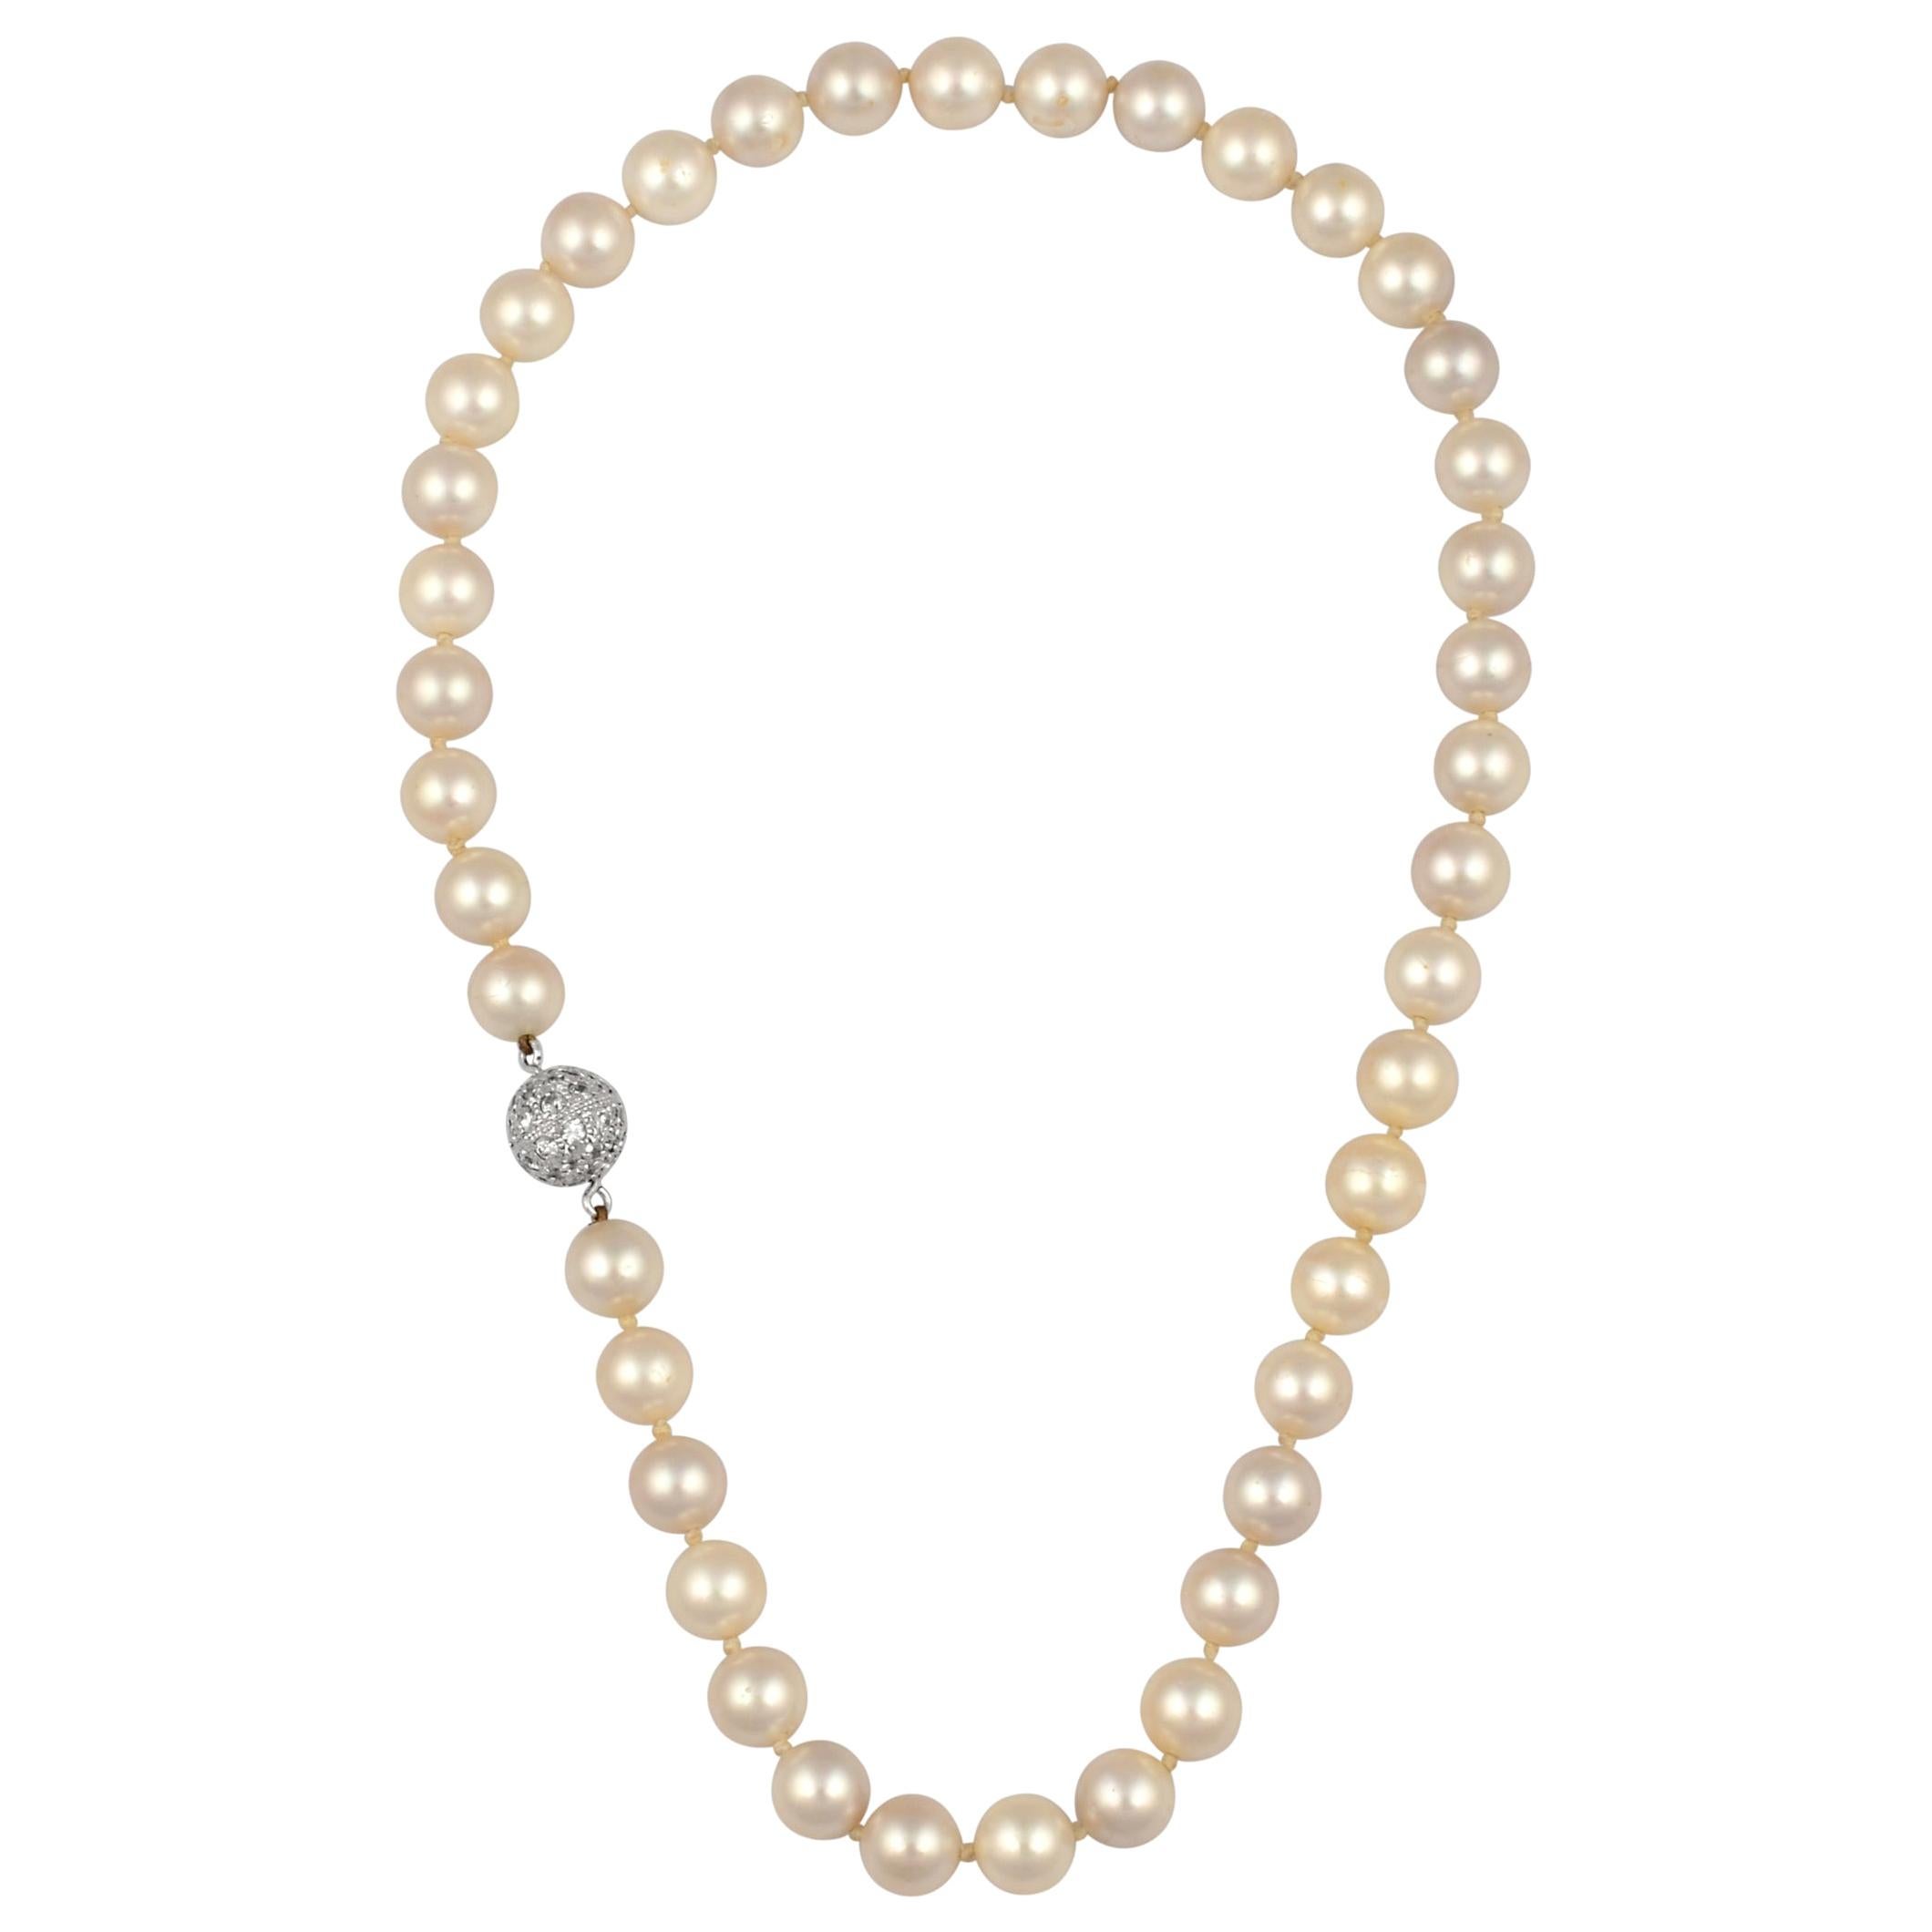 41 Round Akoya Pearls Strand Necklace Set in Metal Ball Clasp For Sale